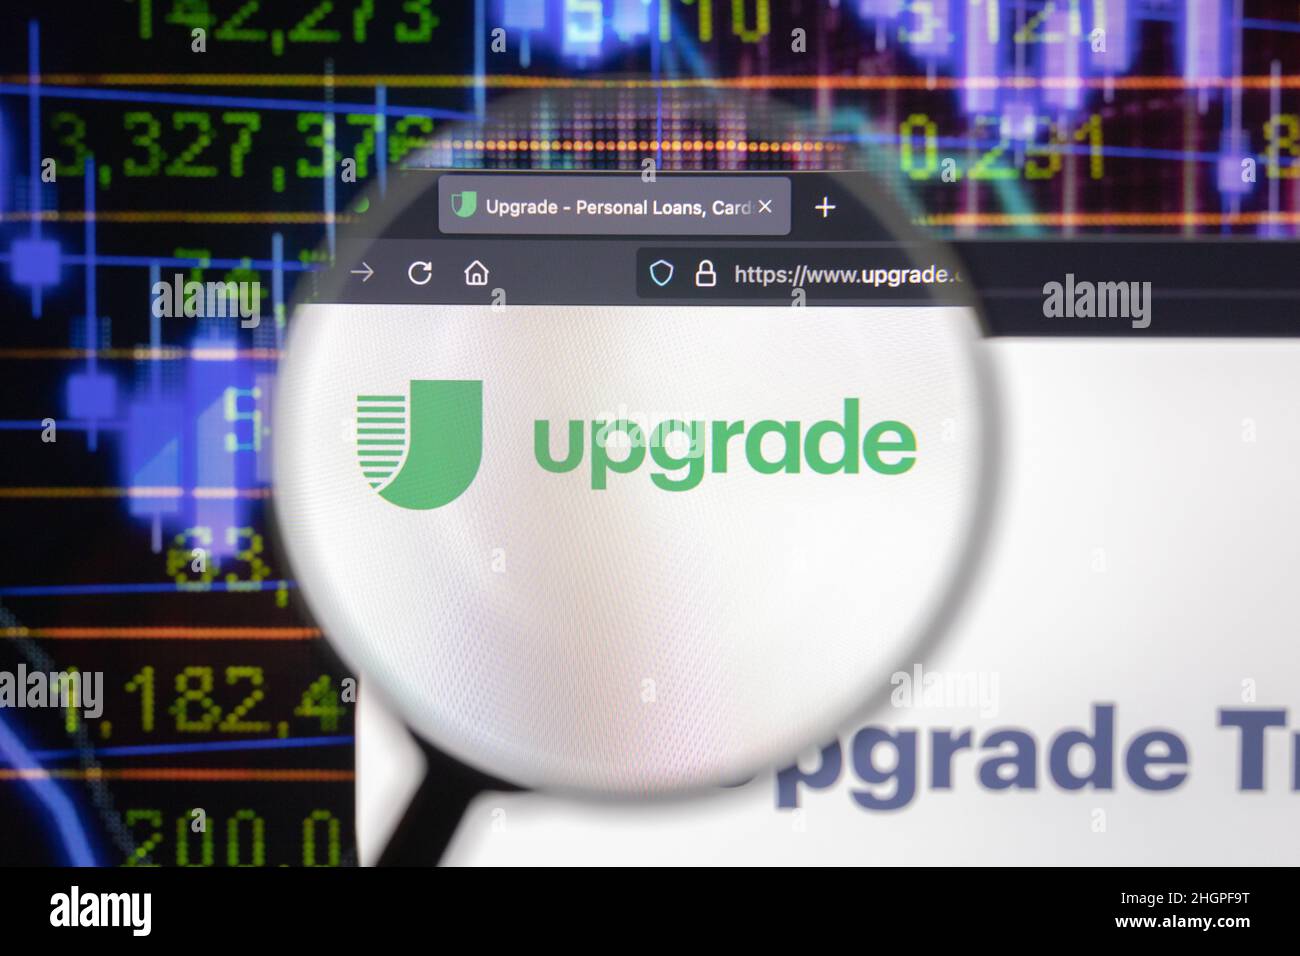 Upgrade company logo on a website with blurry stock market developments in the background, seen on a computer screen through a magnifying glass. Stock Photo